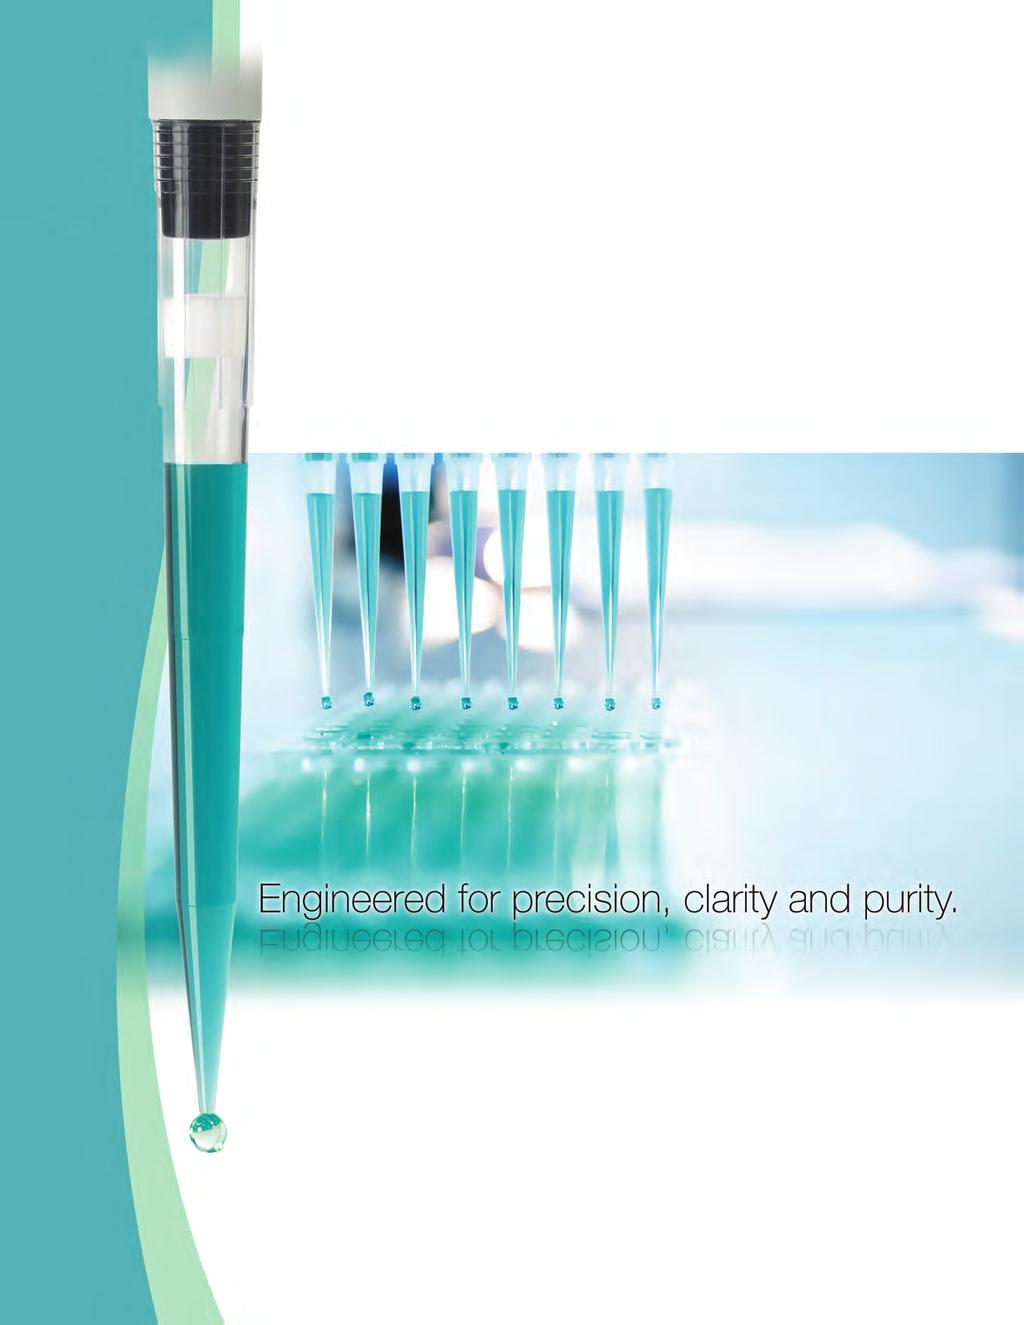 Universal Fit Pipette